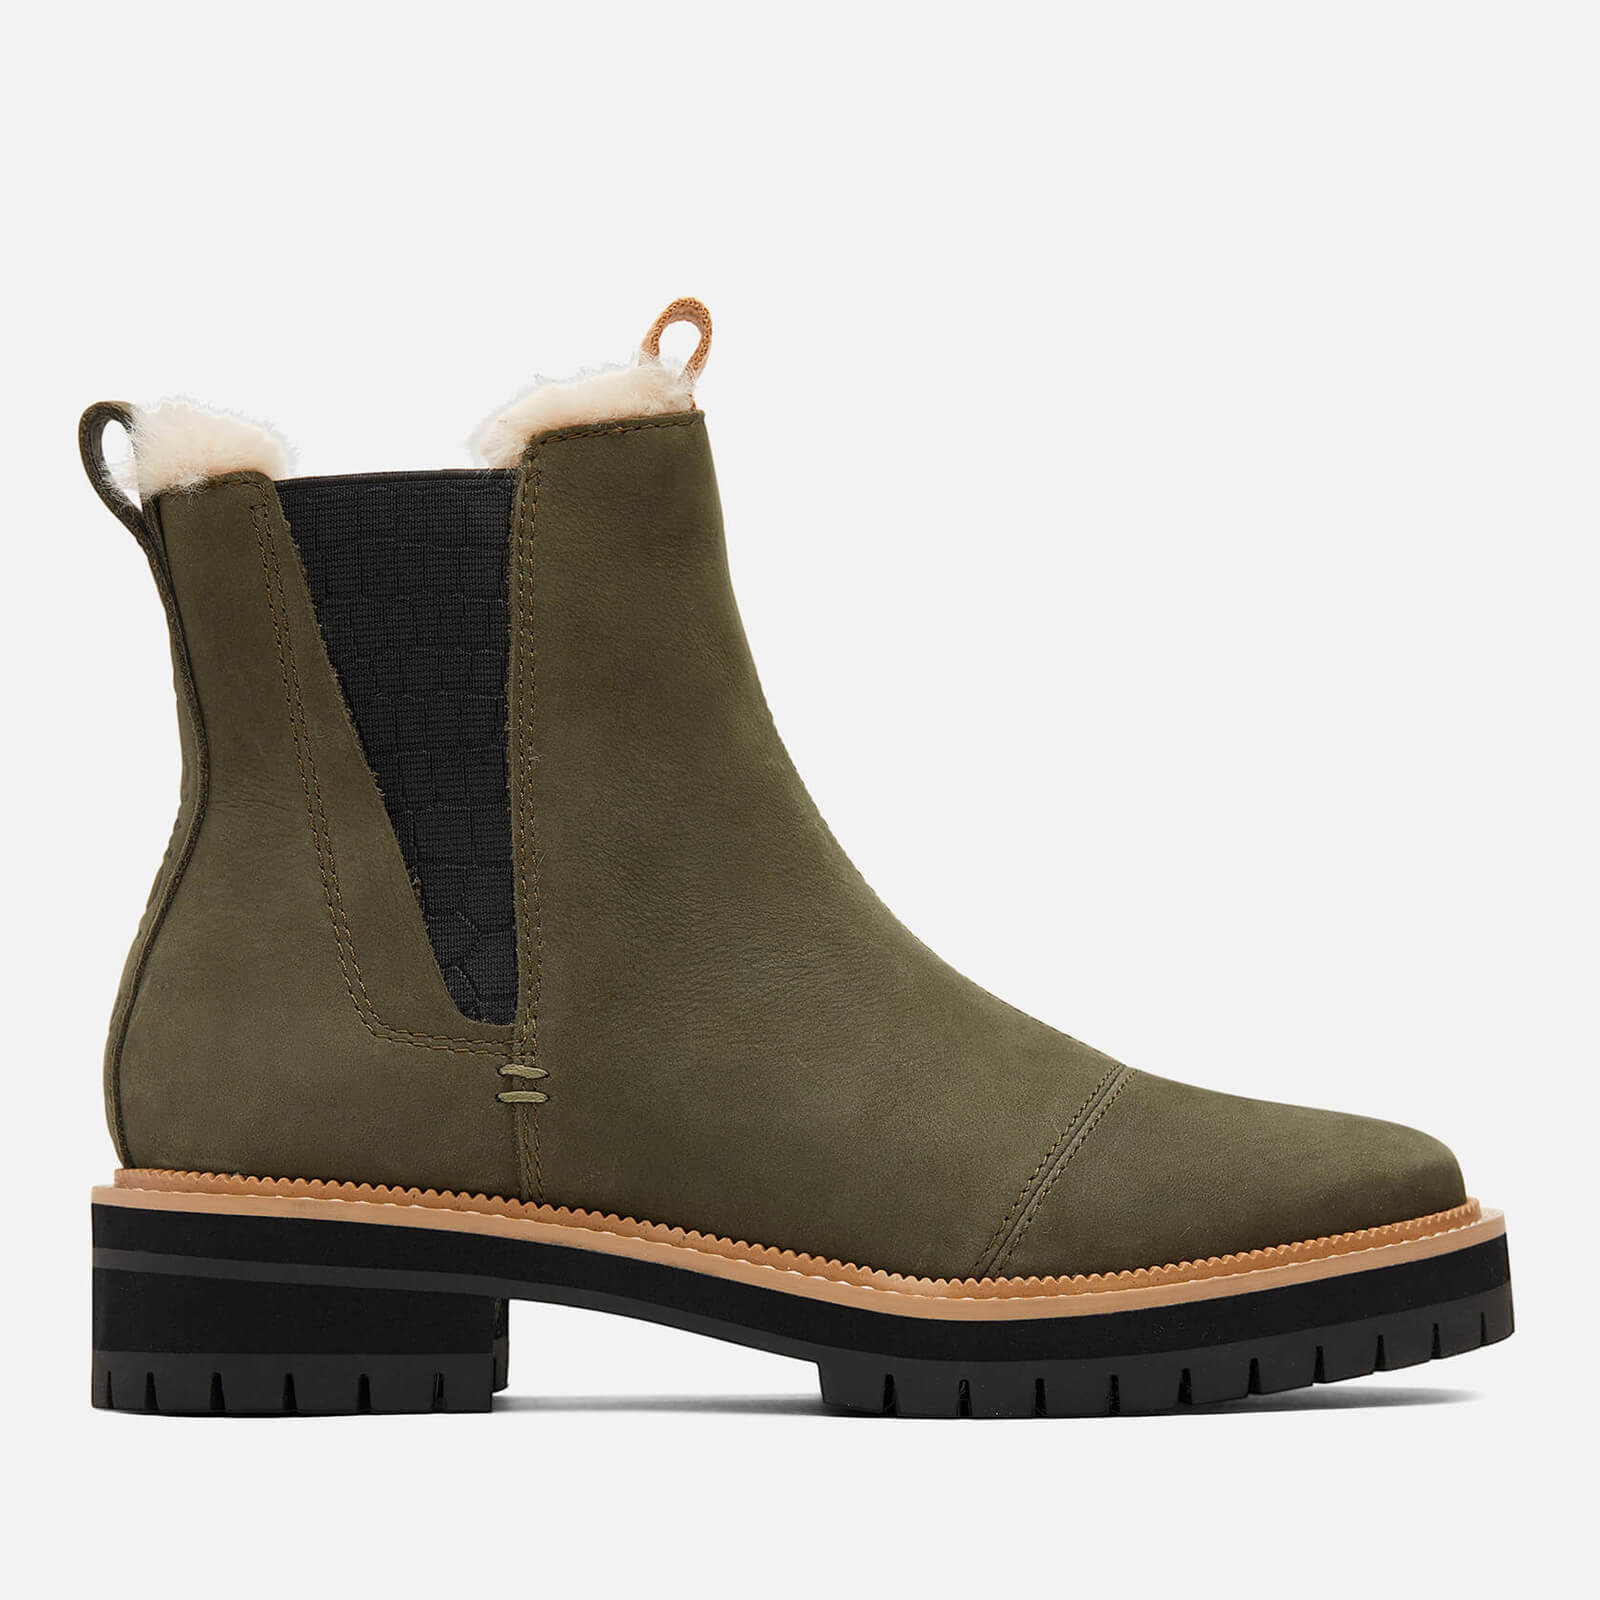 TOMS Women’s Dakota Water Resistant Leather Chelsea Boots - Olive